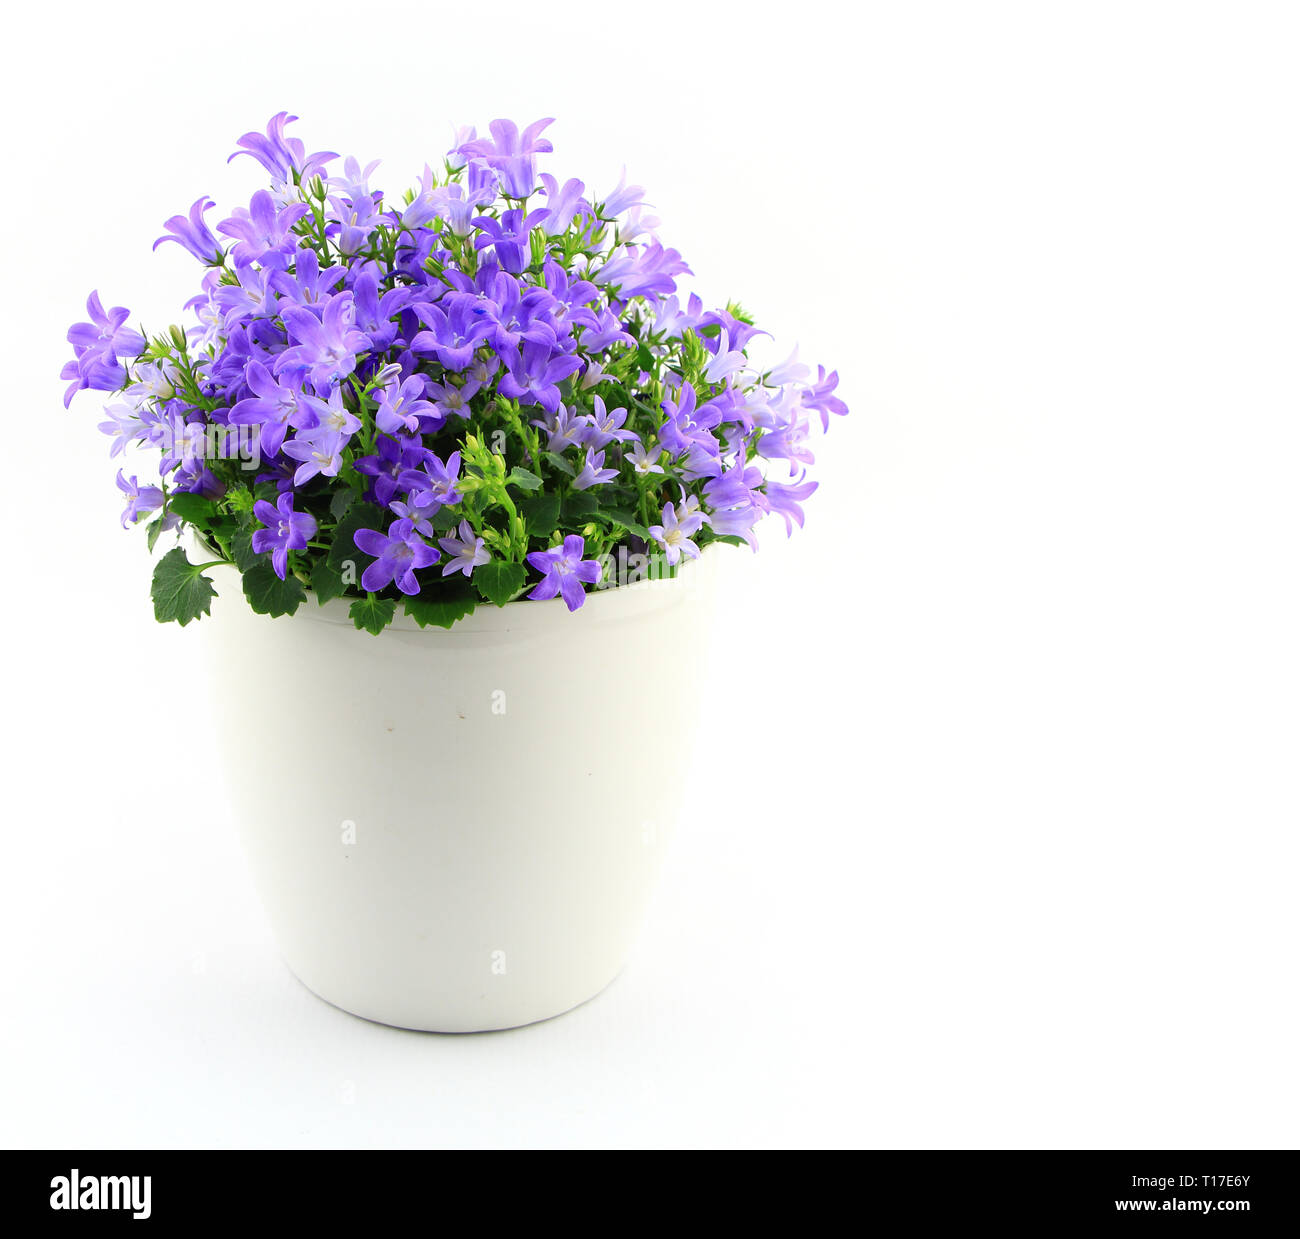 Potted Campanula Portenschlagiana isolated on white background Stock Photo